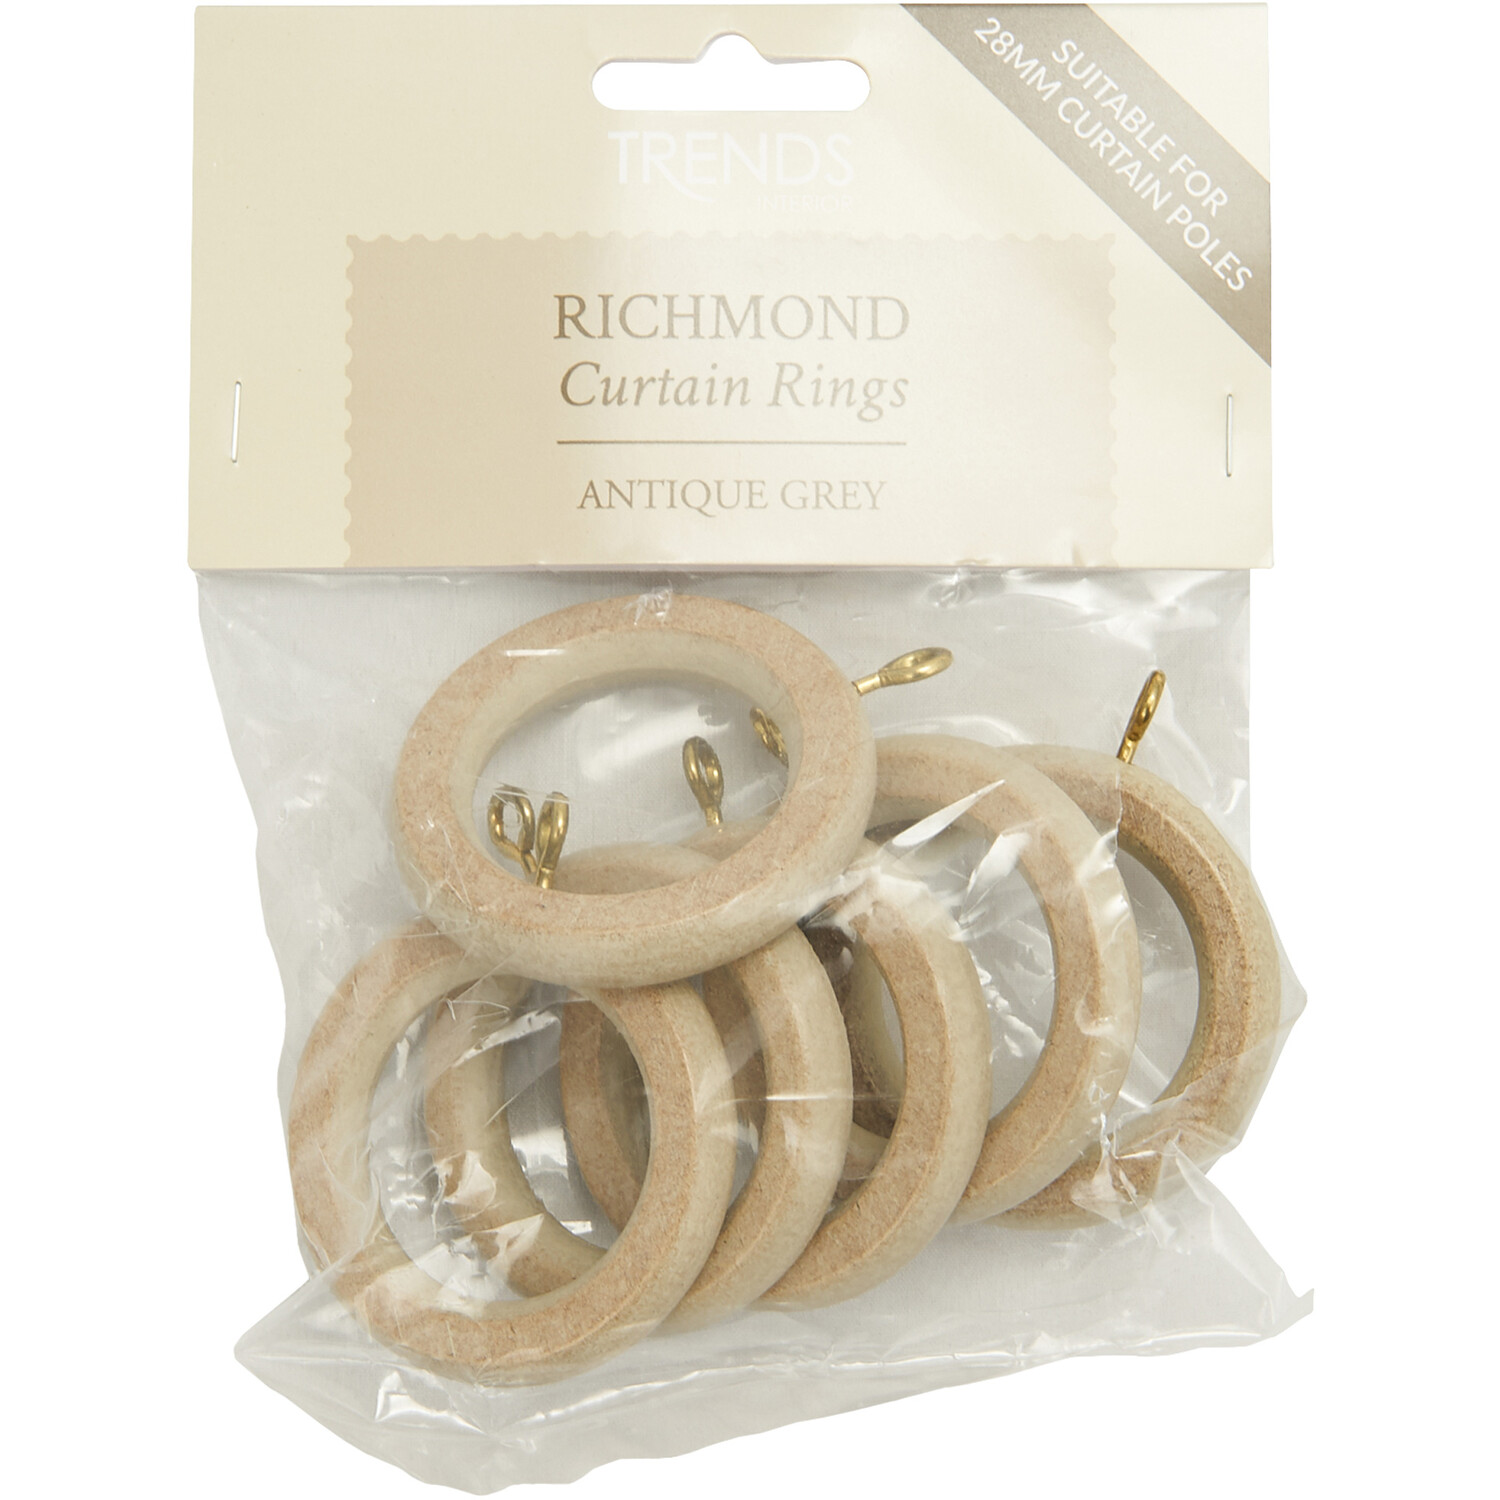 Richmond Curtain Rings - Antique Grey Image 1